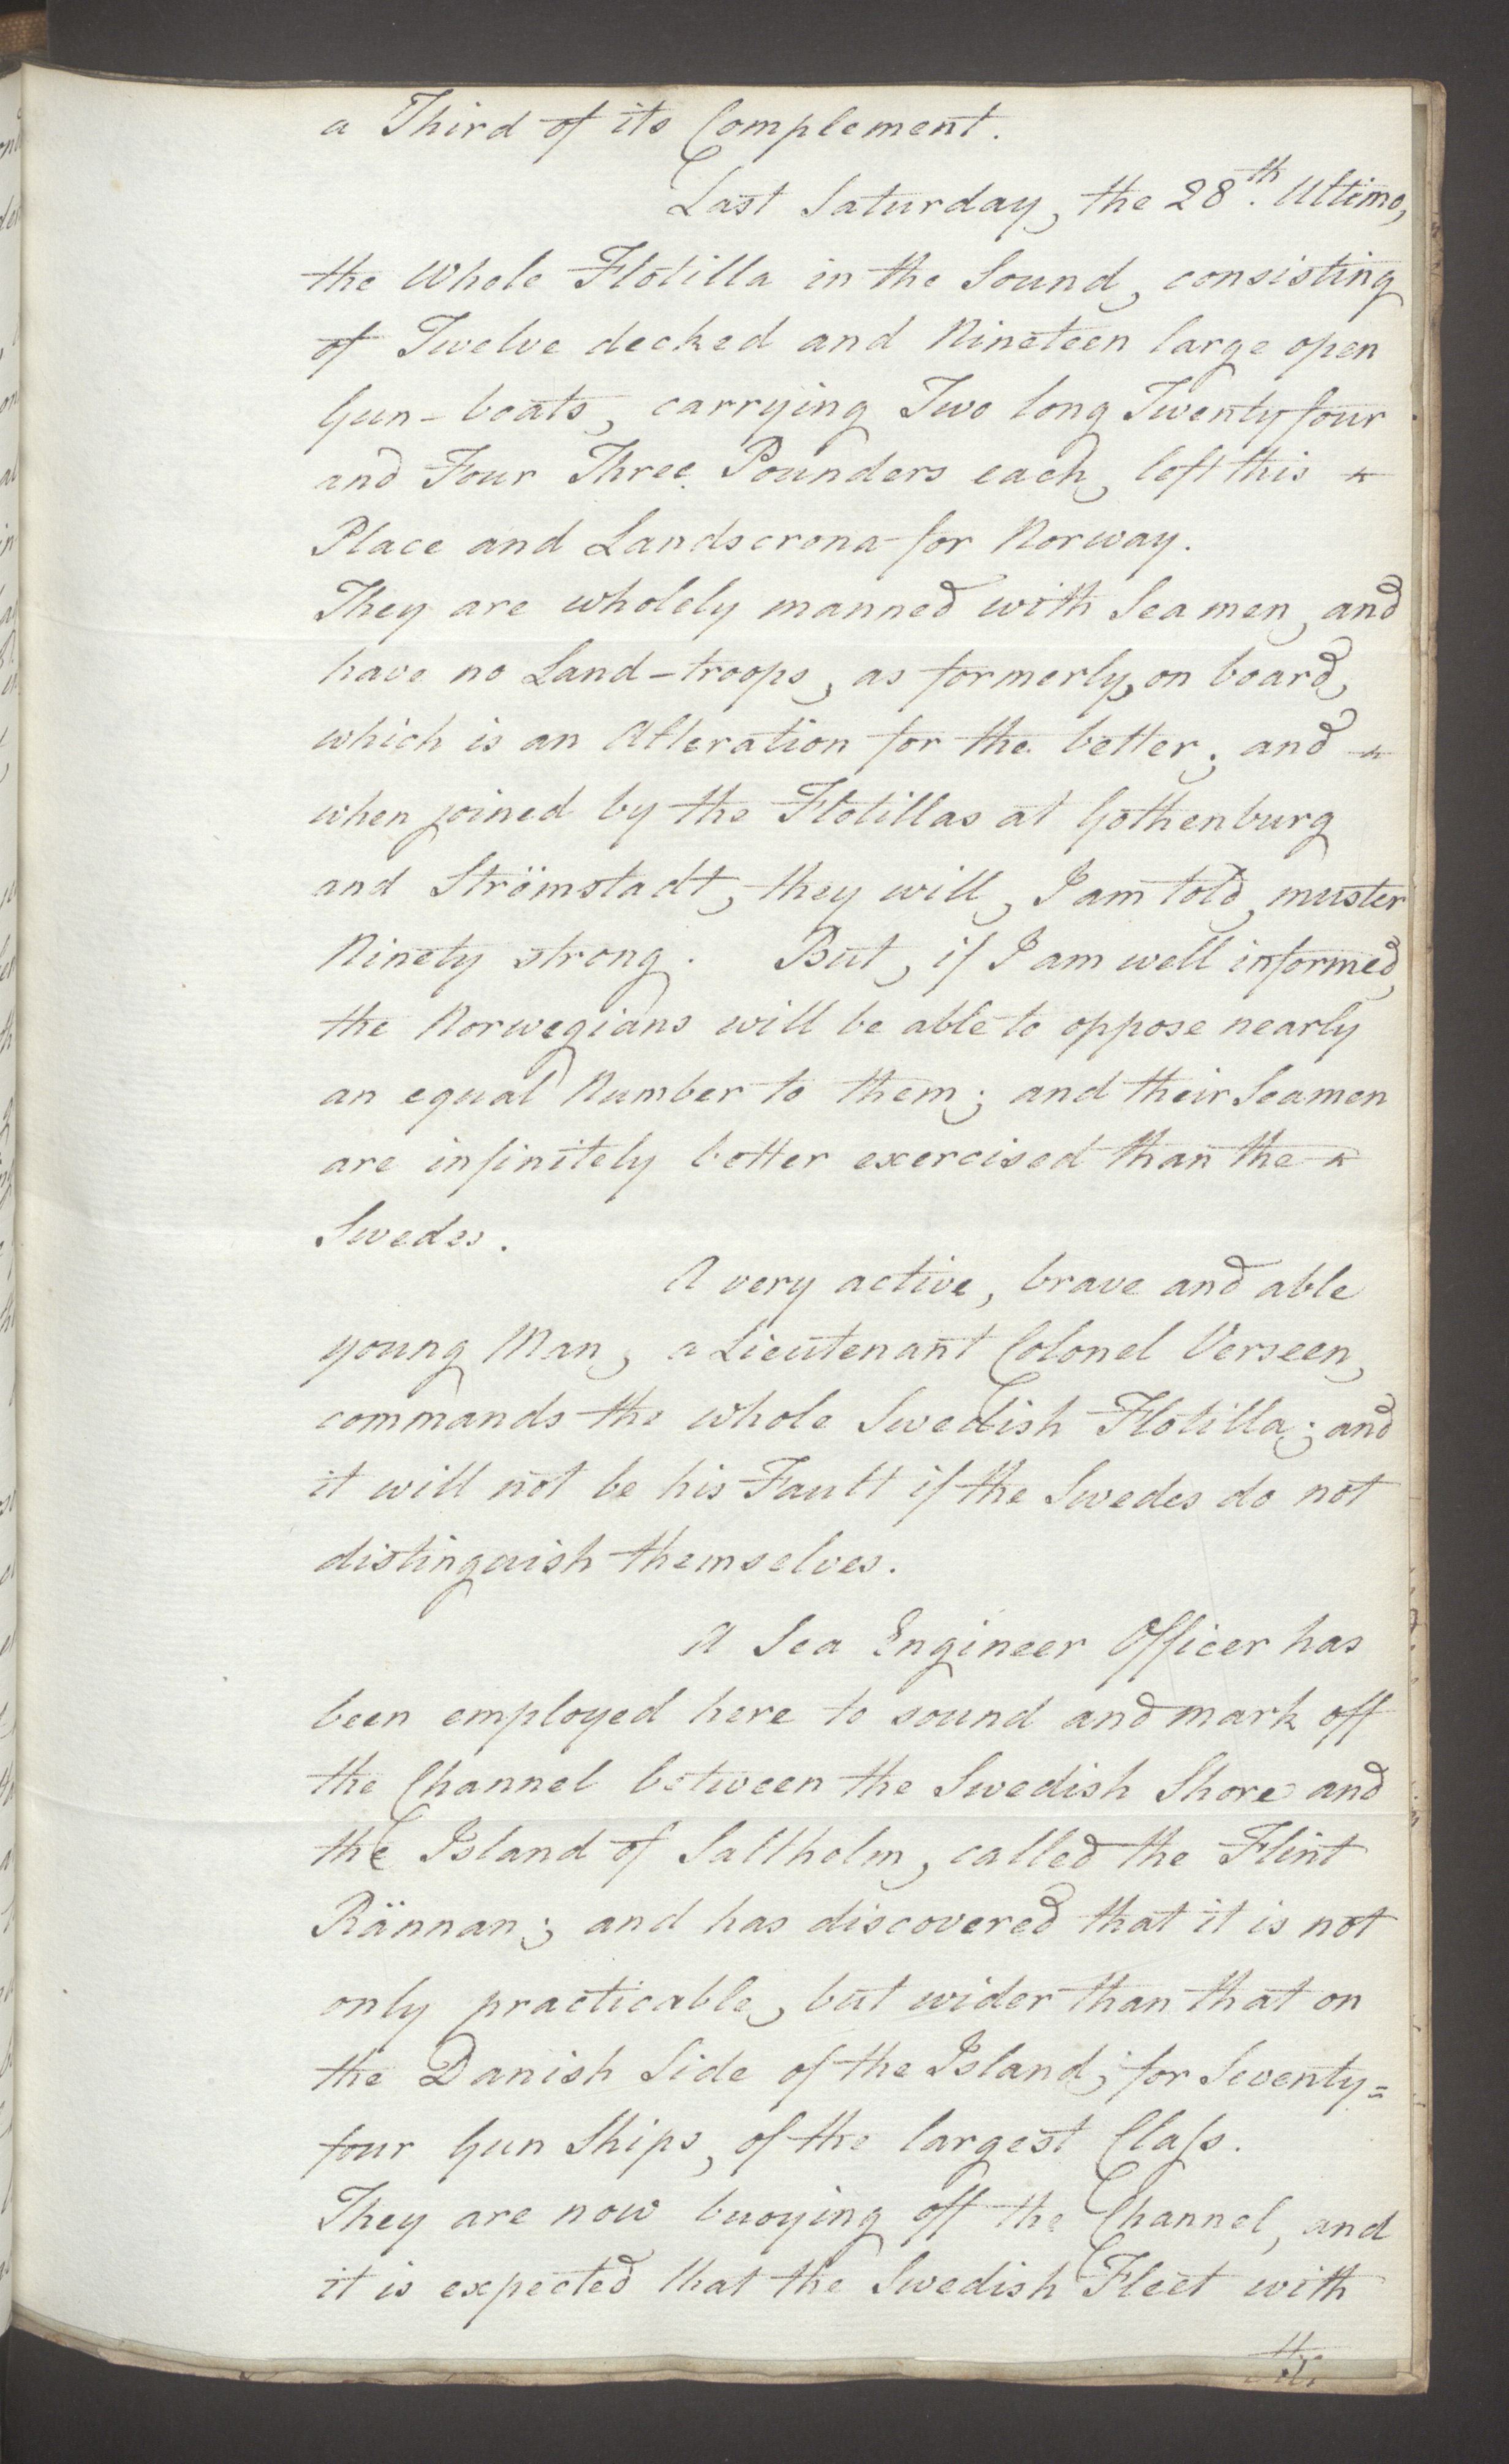 Foreign Office*, UKA/-/FO 38/16: Sir C. Gordon. Reports from Malmö, Jonkoping, and Helsingborg, 1814, s. 59